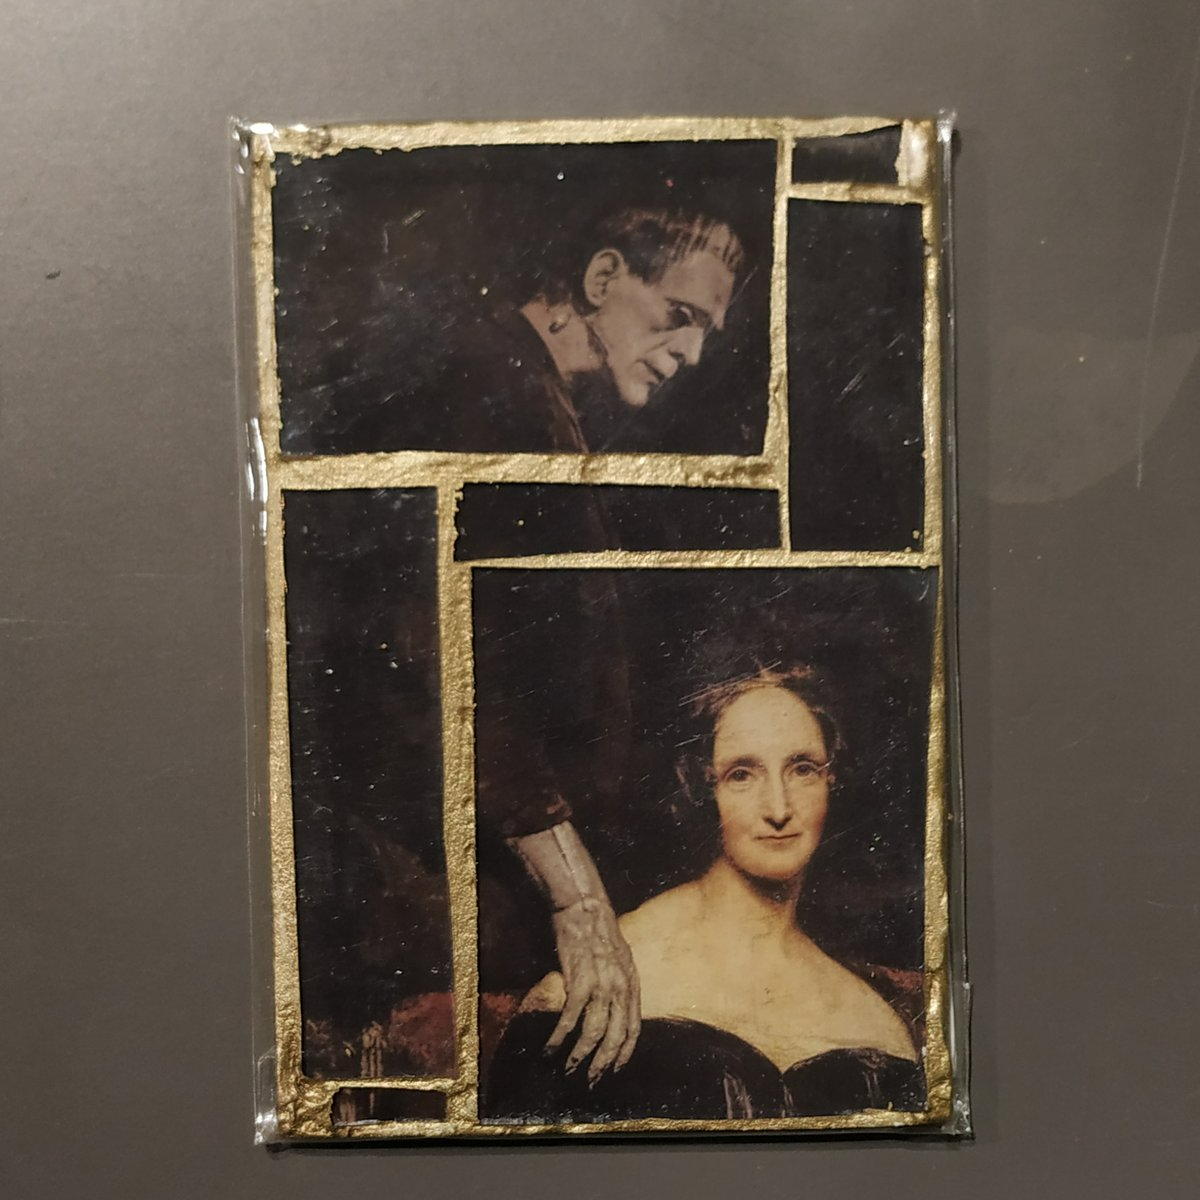 Glass mosaic magnet  "Frankenstein and Mary Shelley"